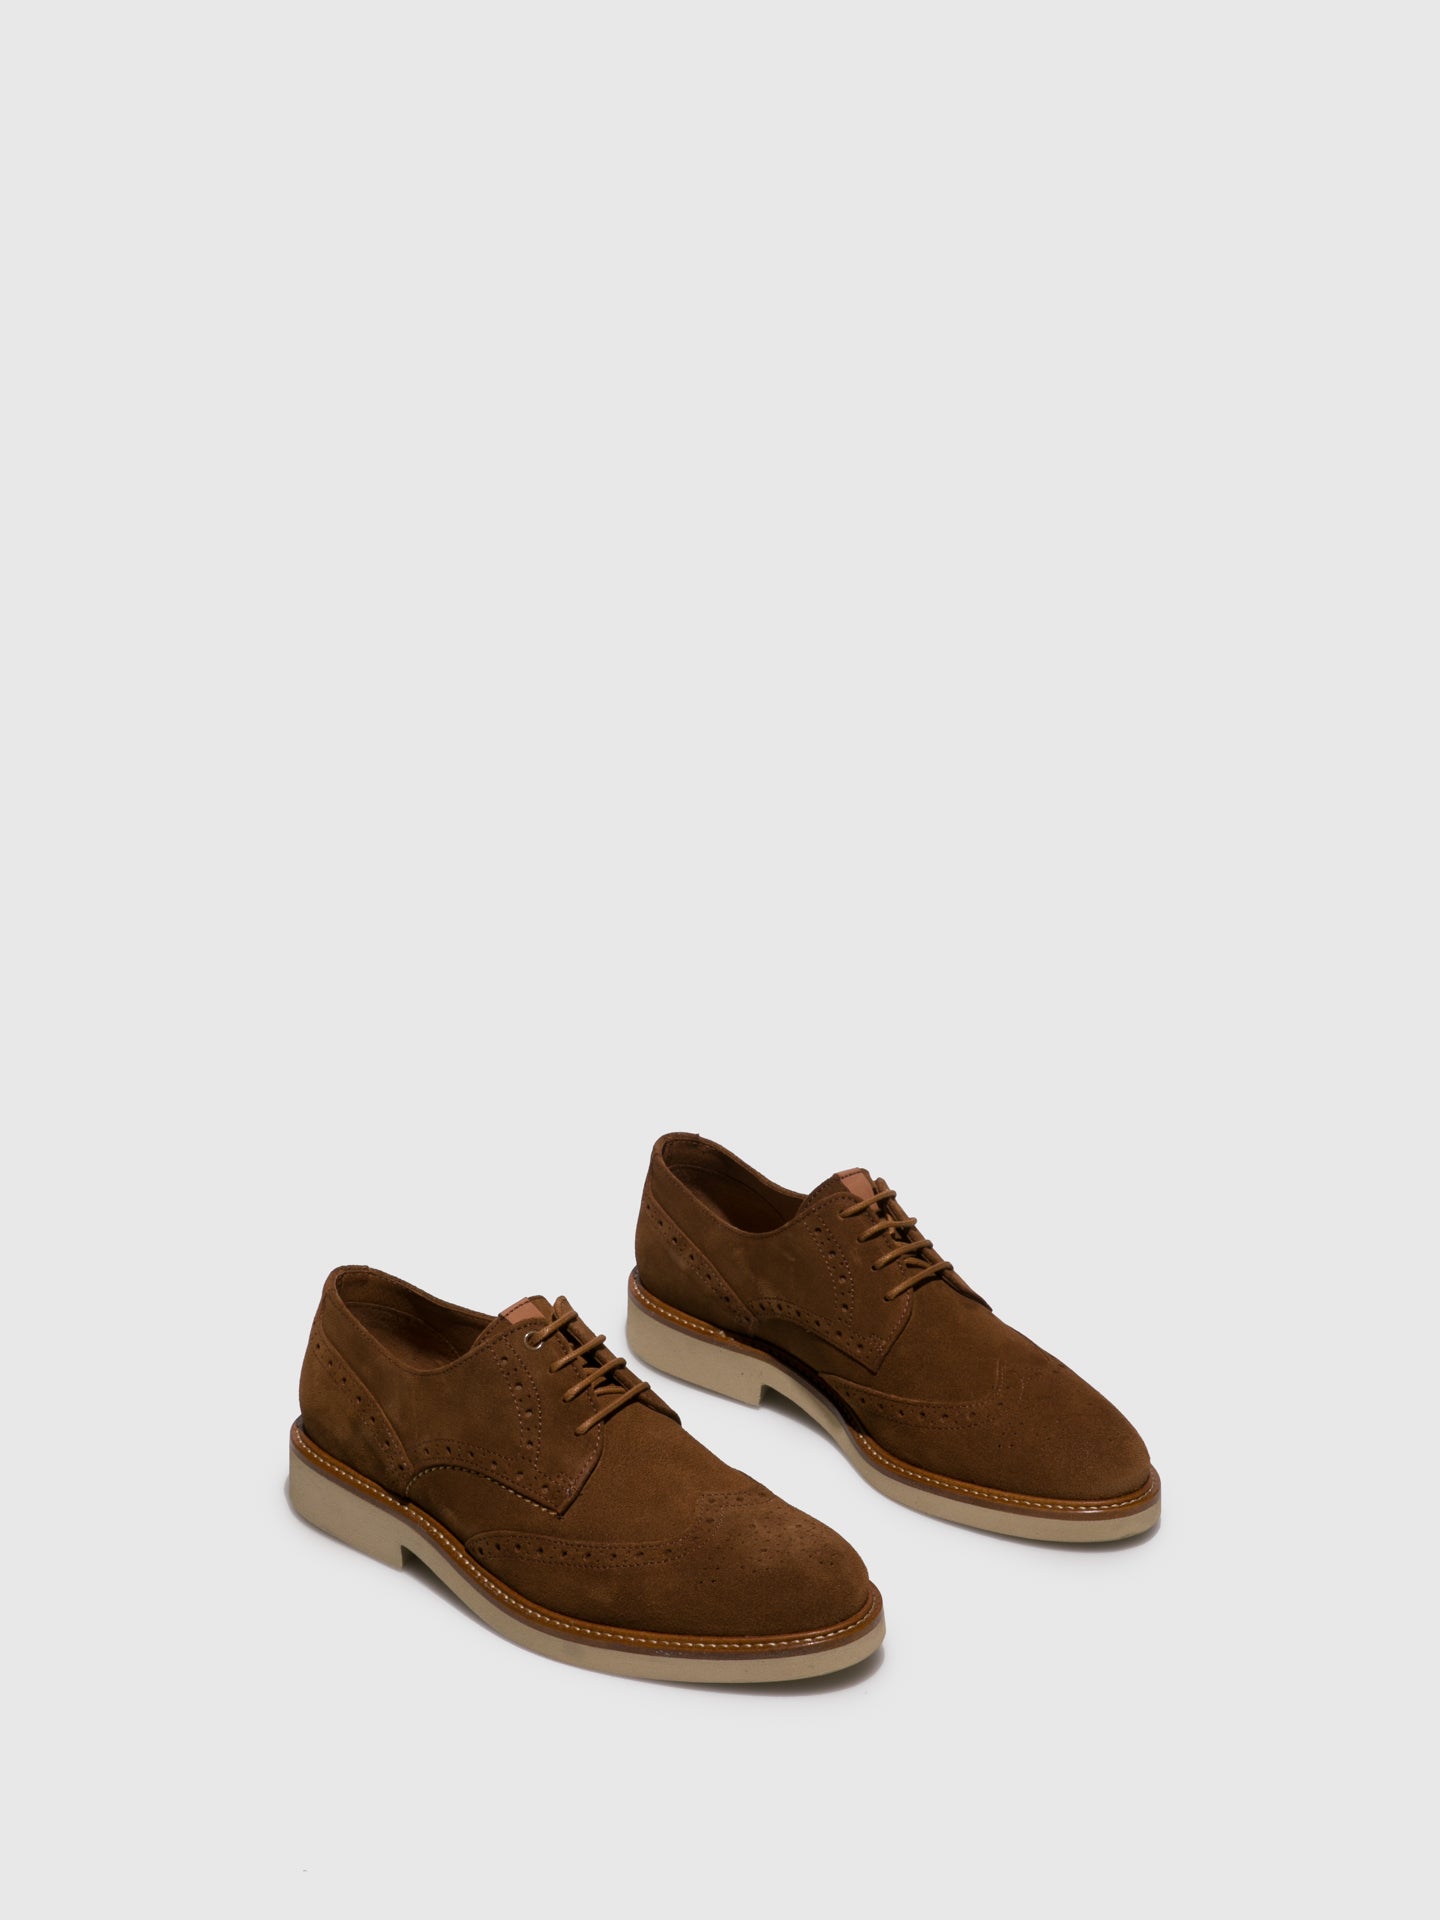 Foreva Brown Oxford Shoes